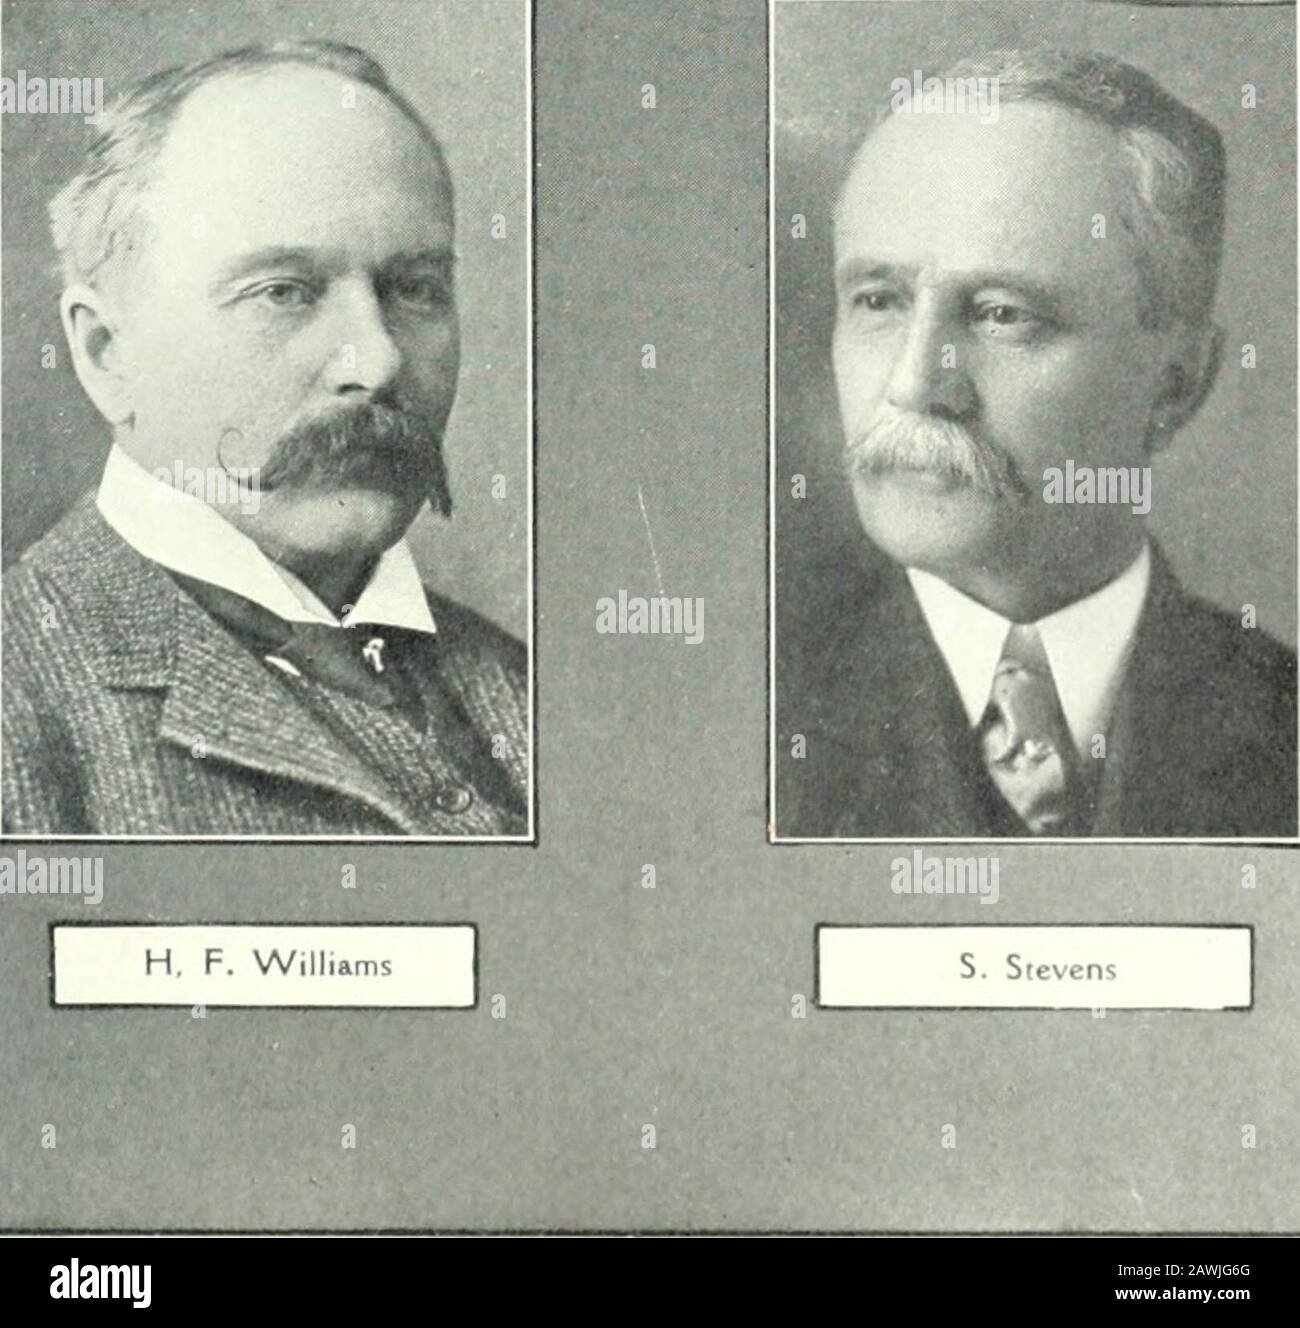 Charter and annual reports, 1859-1912 . W. L Ball B Austin. Officers who have been in ihe service tvveniy-fi,c &gt;cari and over. EASTERN TOWNSHIPS BANK. HEAD OFFICE, SHERBROOKE, QUE. Capital Authorized,Capital Paid Up,Reserve Fund, $1,500,000.00$1,449,067.51$ 375,000.00 DIRECTORS.R. W. HENEKER, ESQ., - President.A. A. ADAMS, ESQ. - - Vice-Phesidknt.HON. M. H. COCHRANE HON. J. H. POPE, J. N. GALER, ESQ. HON. G. G. STEVENS, T. S. MOREY, ESQ. JOHN THORNTON, ESQ. THOS. HART, ESQ. WILLIAM FARWELL, - General Manaqbk 1884. BRANCHES. QUEBEC: BEDFORD COATICOOK COWANSVILLE FARNHAM GRANBY RICHMOND 8HER Stock Photo